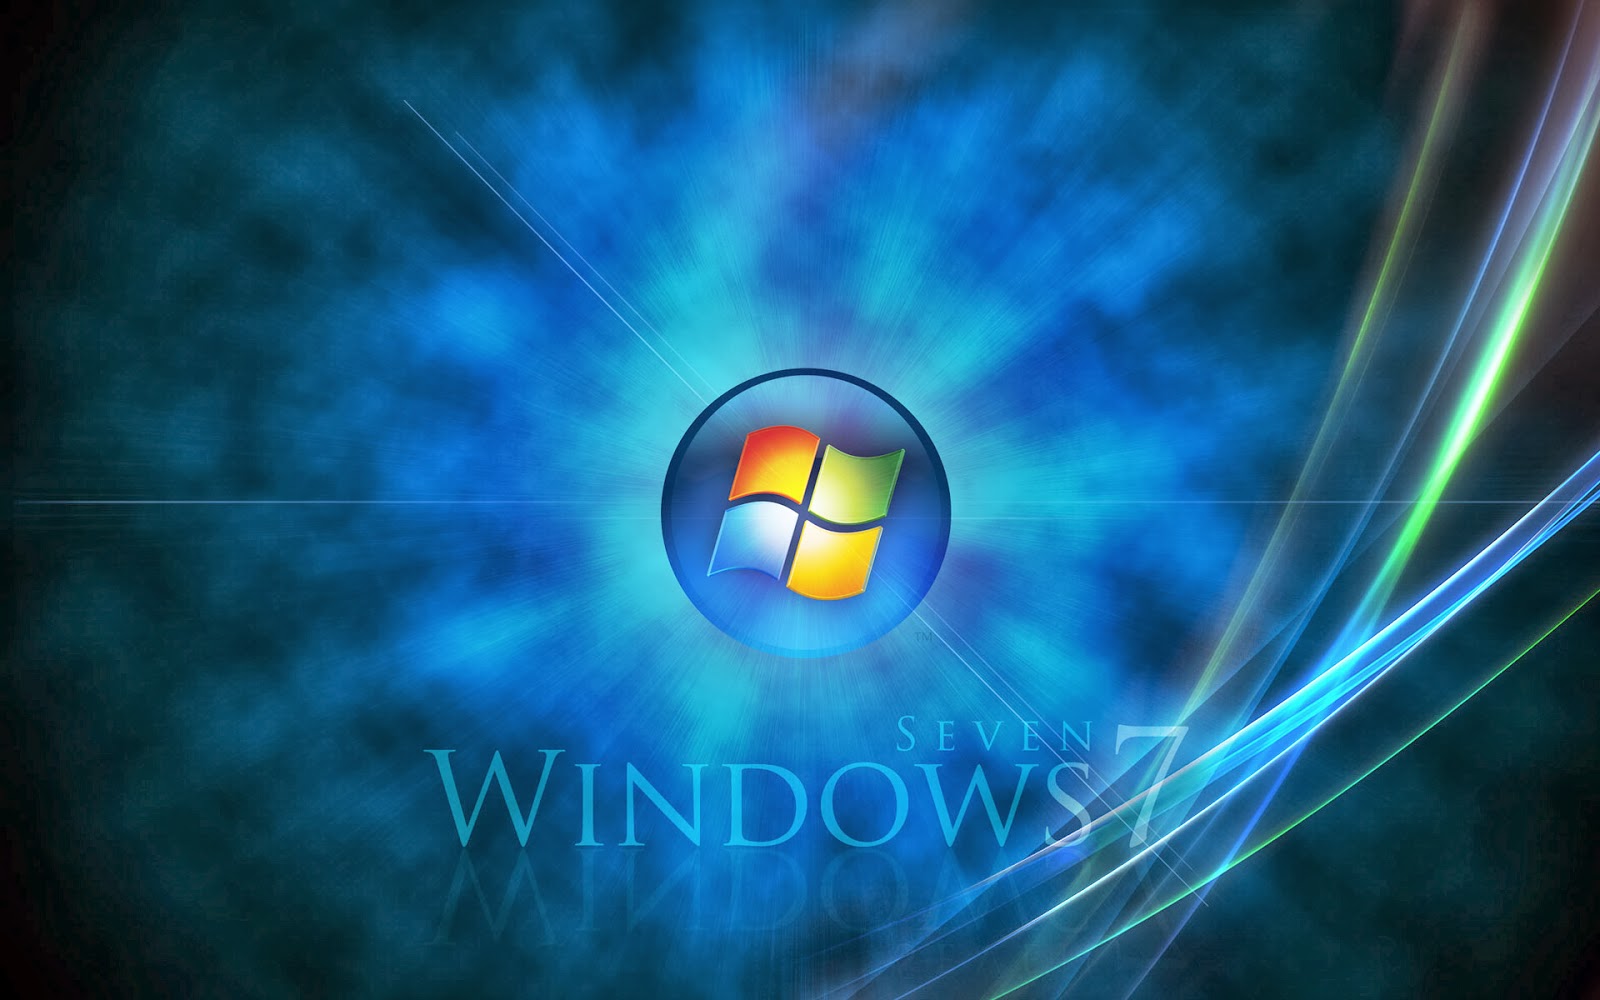 Windows HD Wallpaper And Songs Movies Live Tv